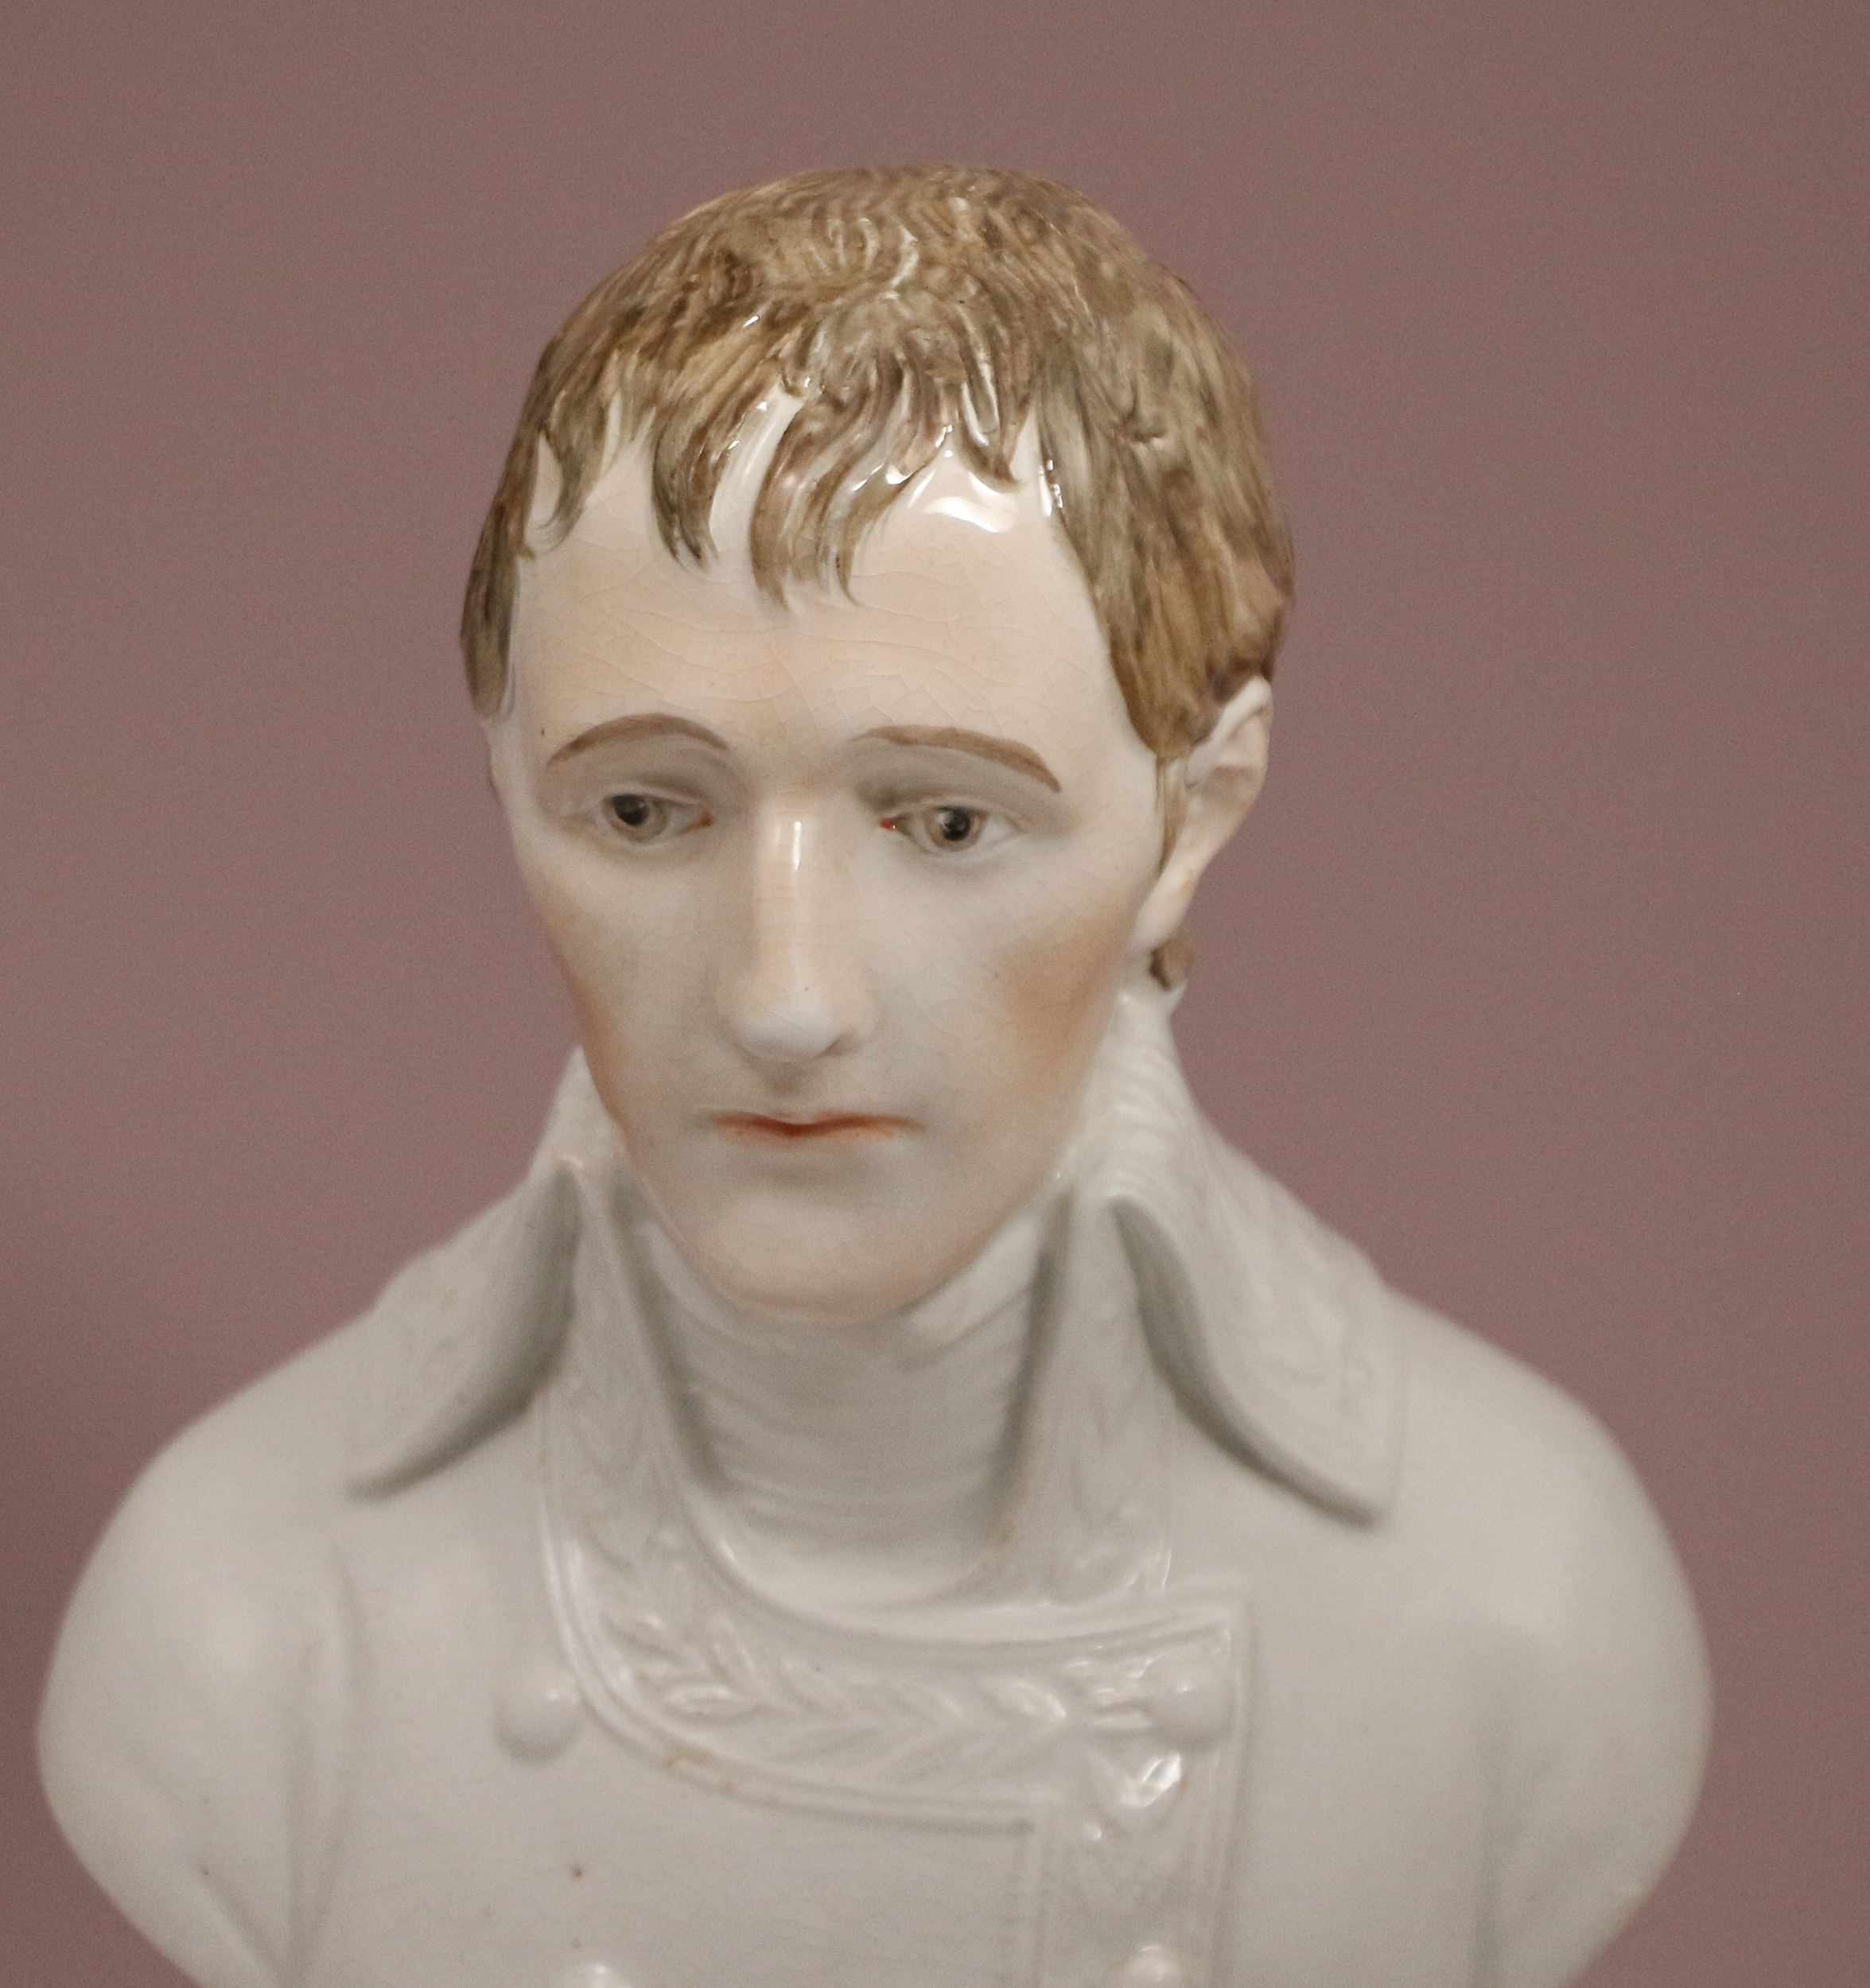 Staffordshire pearlware glaze pottery figure bust of Napoleon made in ...